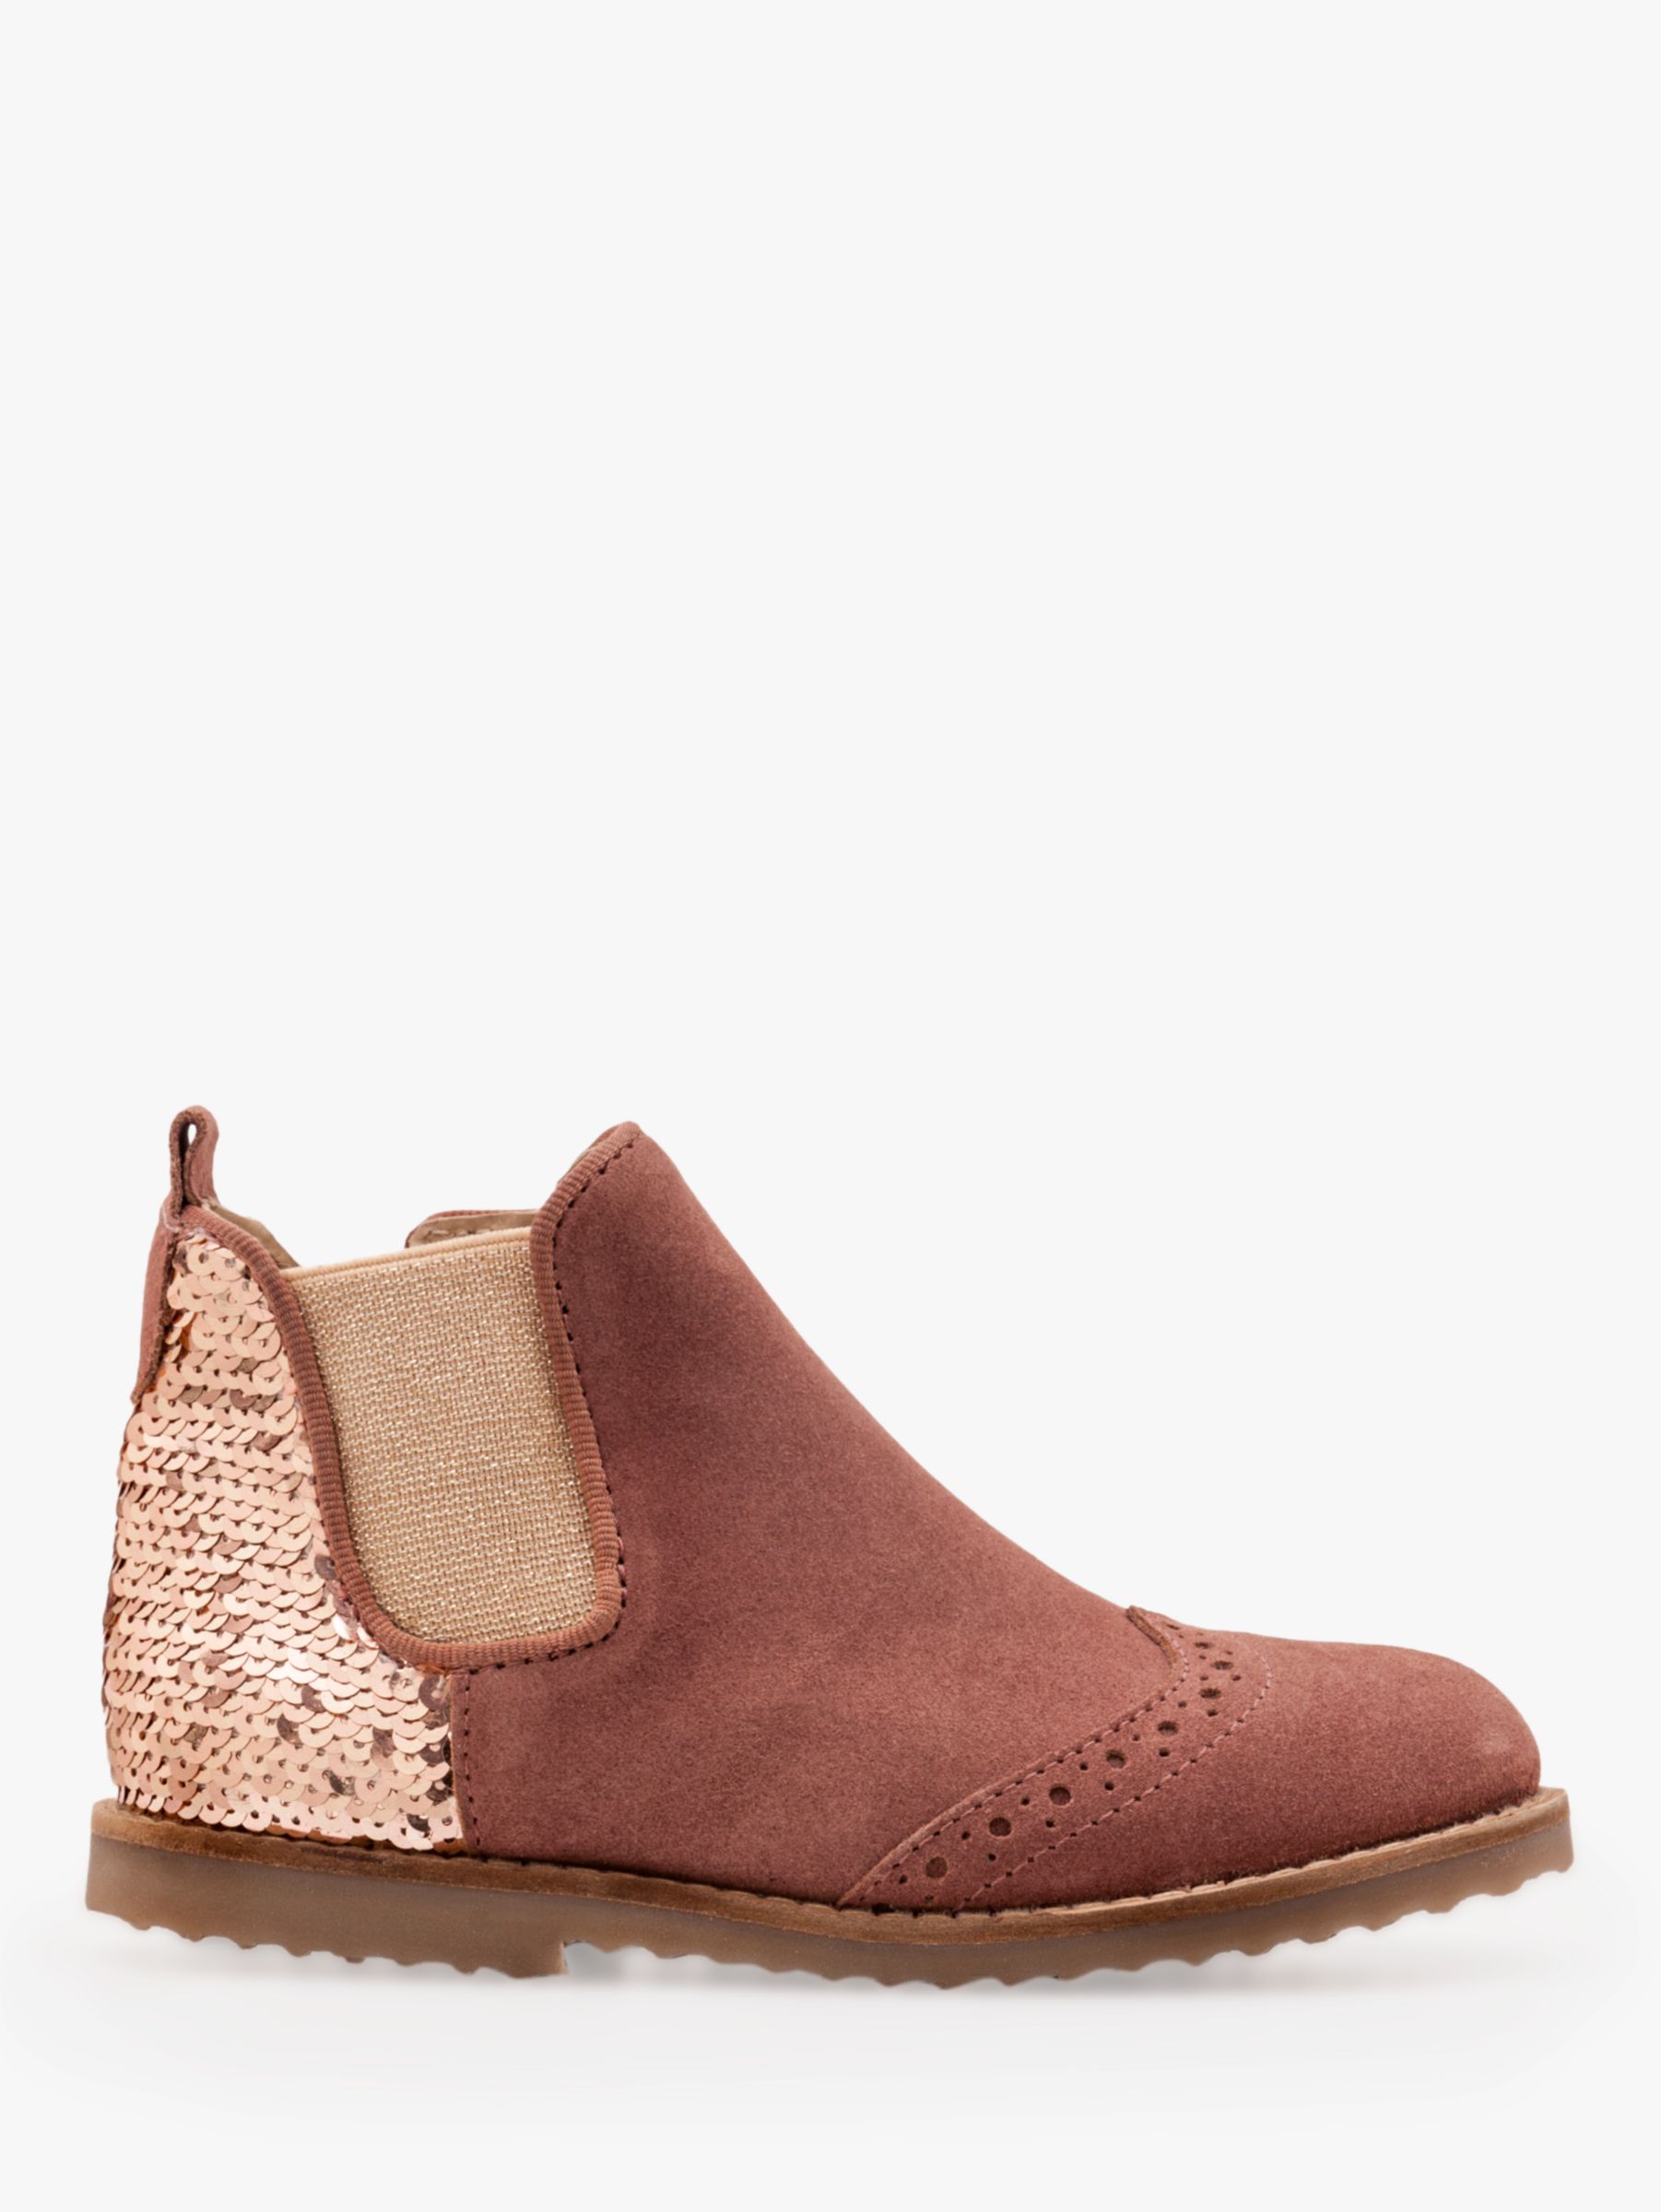 childrens chelsea boots